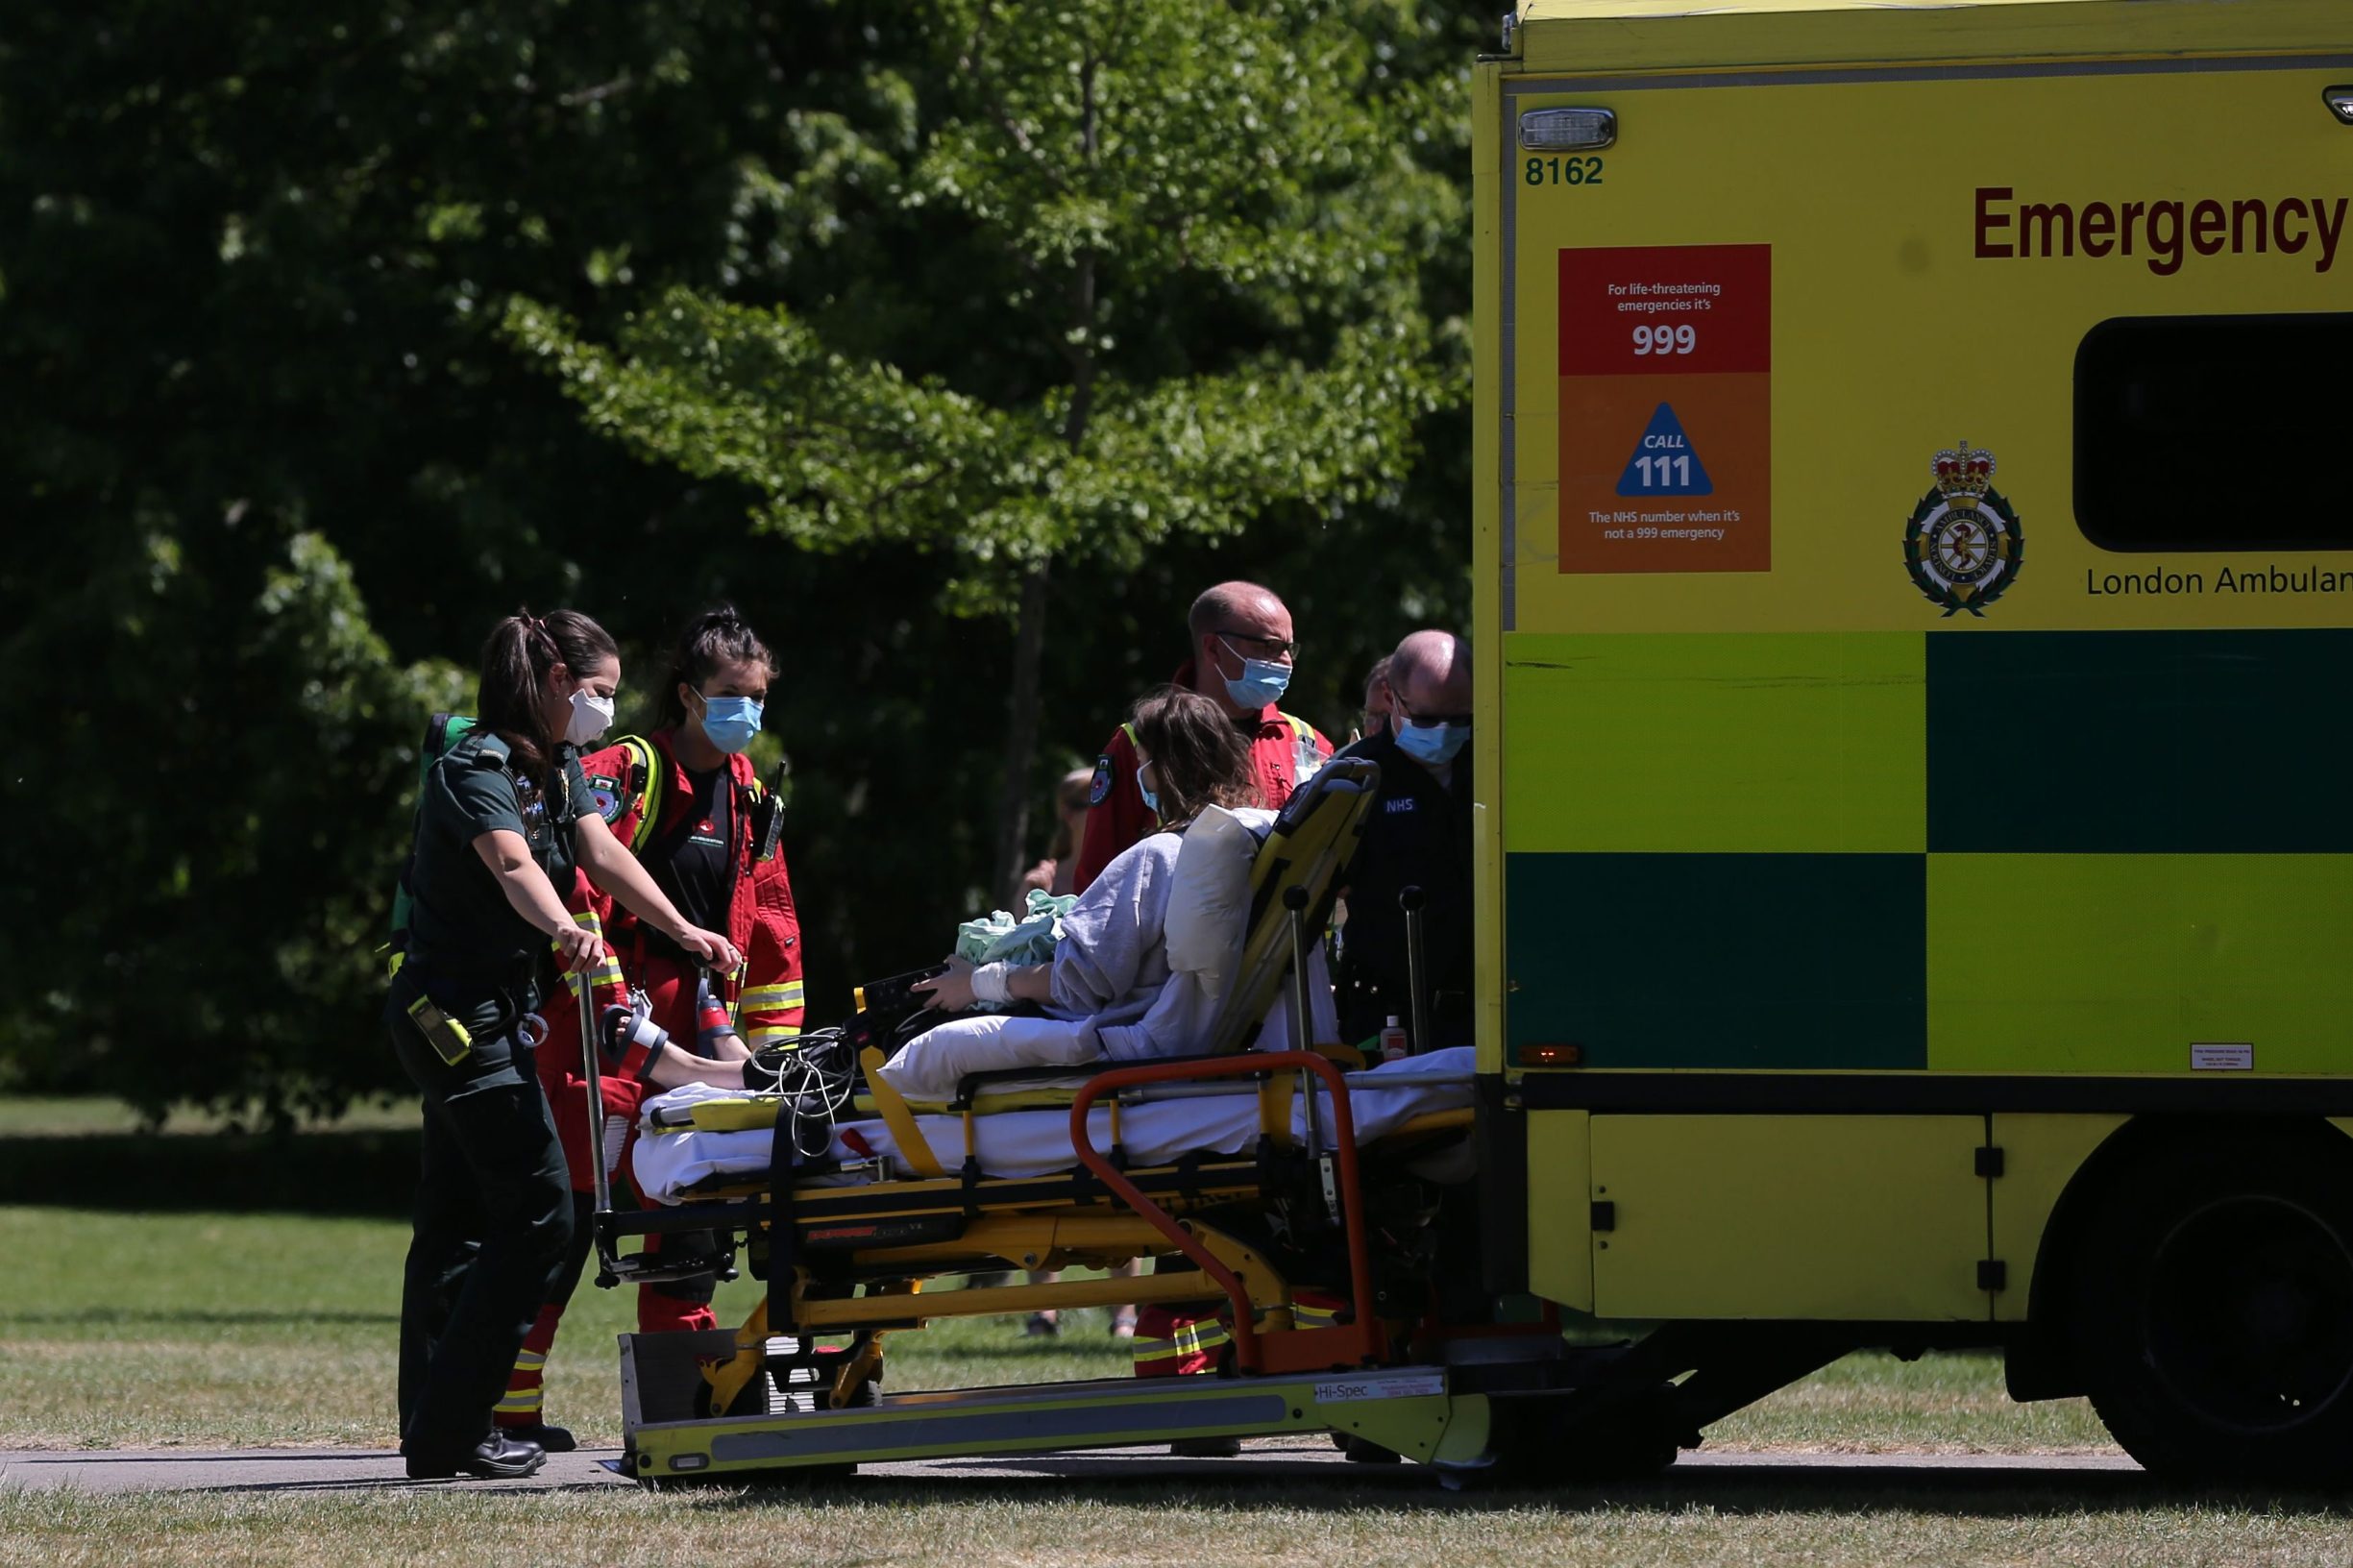 Members of the emergency services wearing PPE (personal protective equipment) transfer a patient into an ambulance in Regent's Park in London on May 20, 2020, as temperatures in the capital are expected to reach 28C (82.4F). - Britain's official coronavirus death toll is at least 41,000 with almost 10,000 dead in care homes in England and Wales alone, according to a statistical update released on Tuesday. Some 41,020 deaths where COVID-19 was mentioned on the death certificate were registered across the UK by May 8, according to the Office for National Statistics (ONS). (Photo by ISABEL INFANTES / AFP)